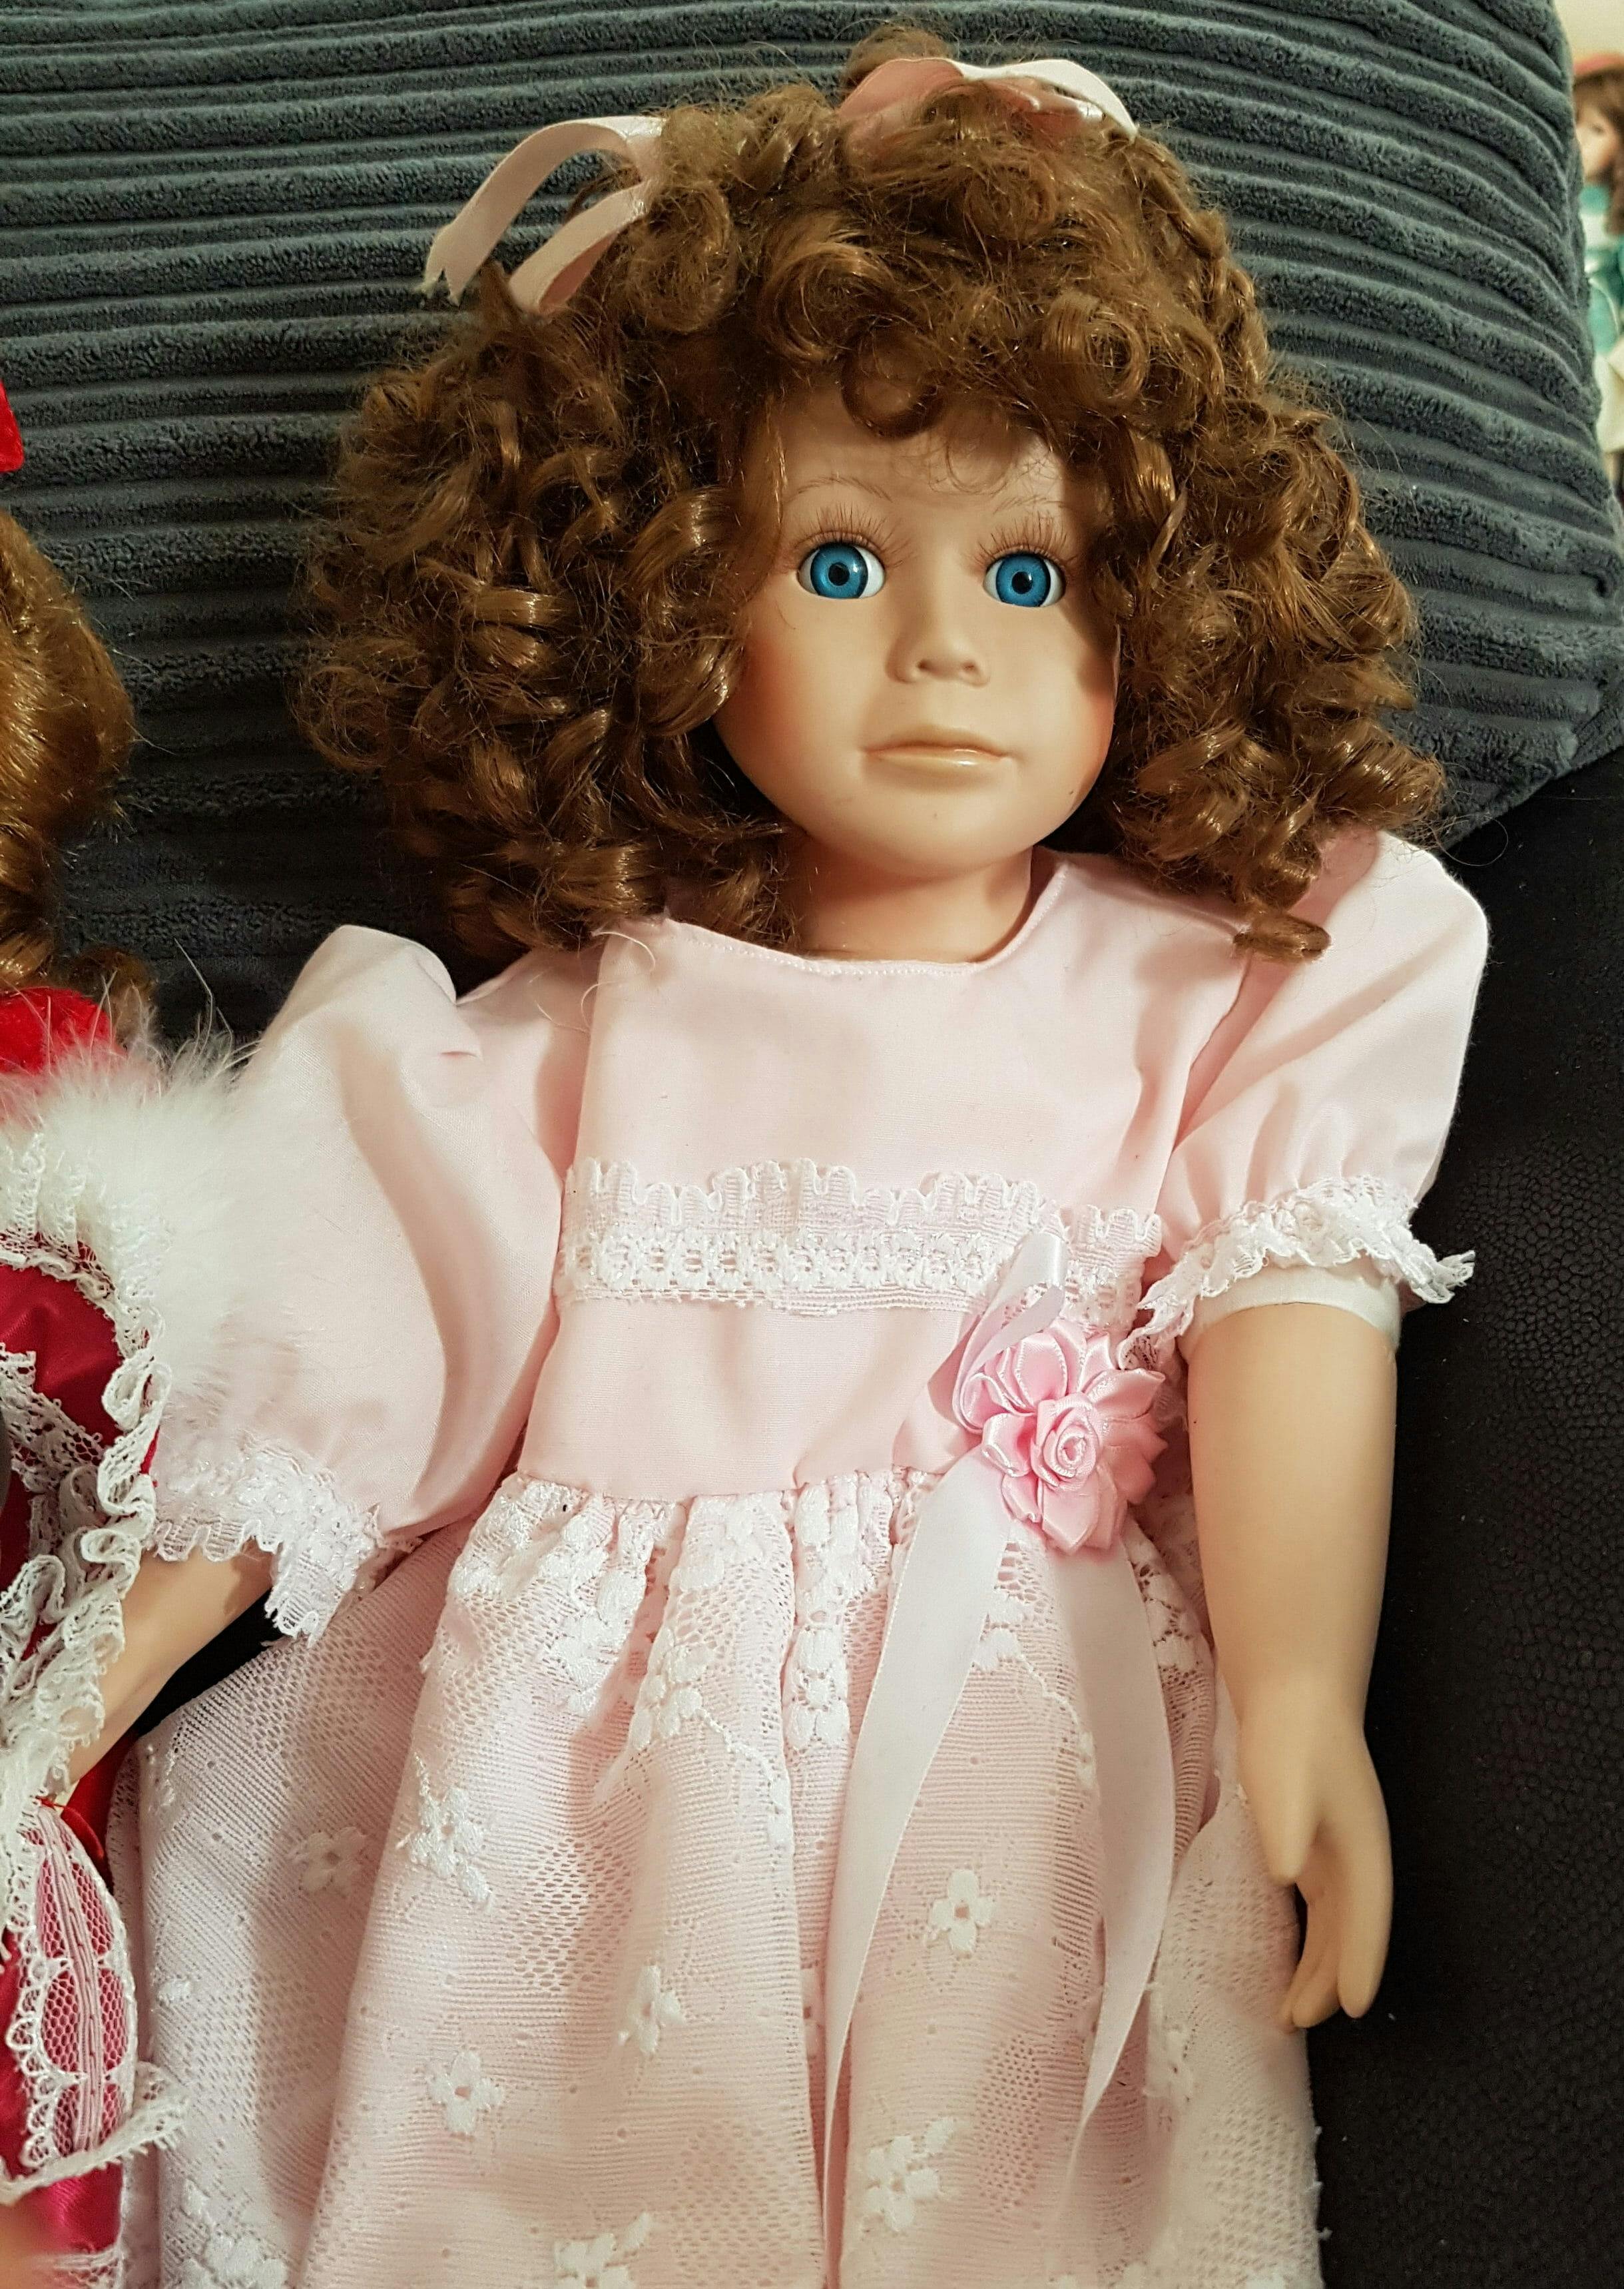 haunted doll creepy spooky collecting halloween